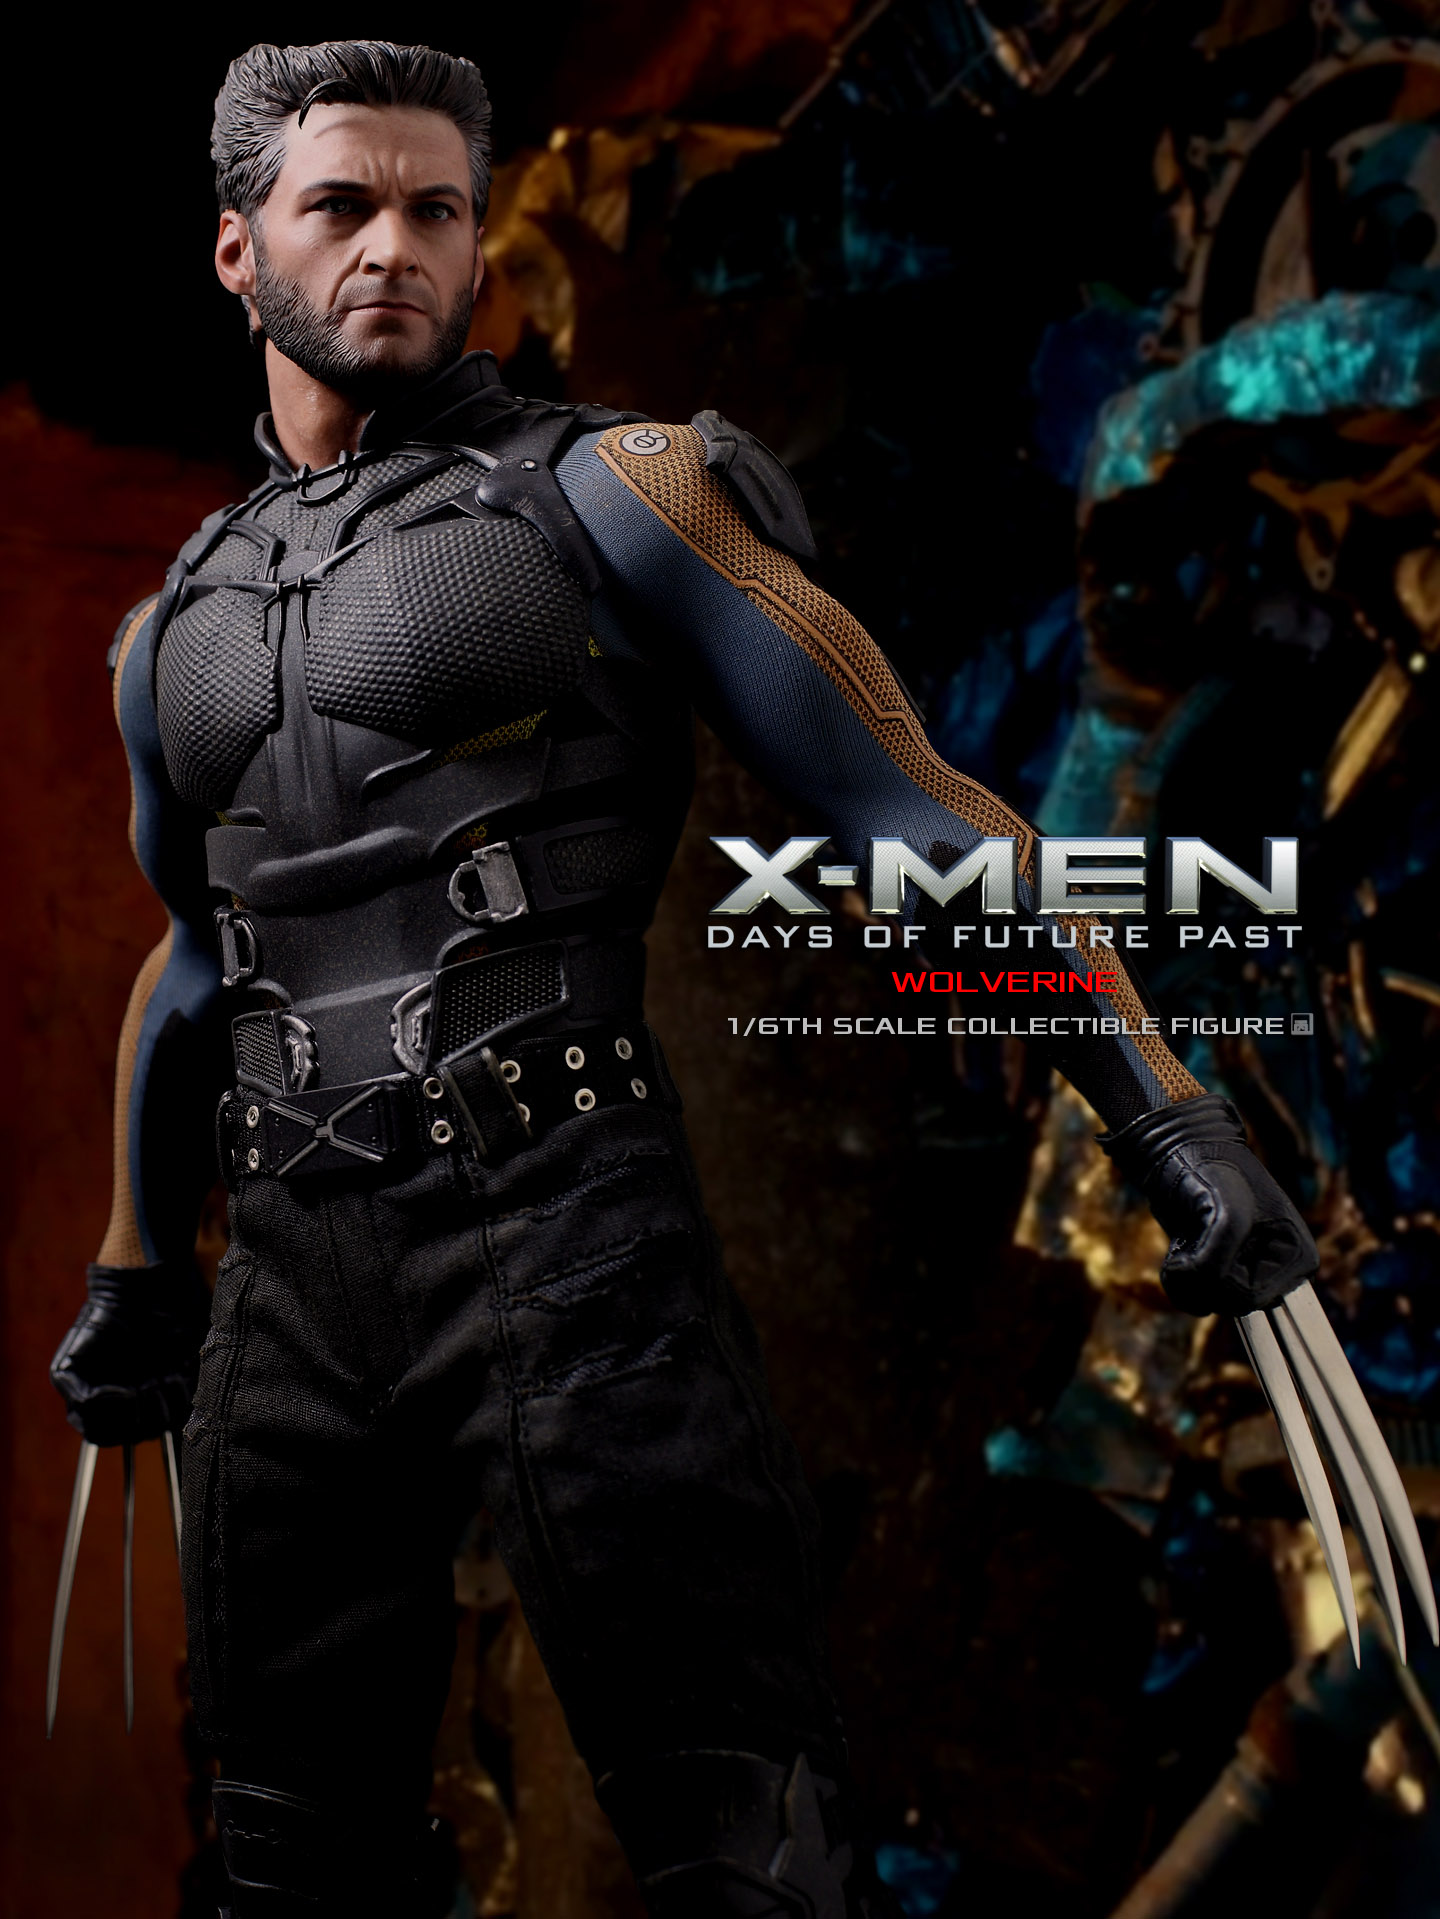 X-MEN DAYS OF FUTURE PAST - WOLVERINE (MMS264) - Page 2 16689725326_e58cdf3d6a_o